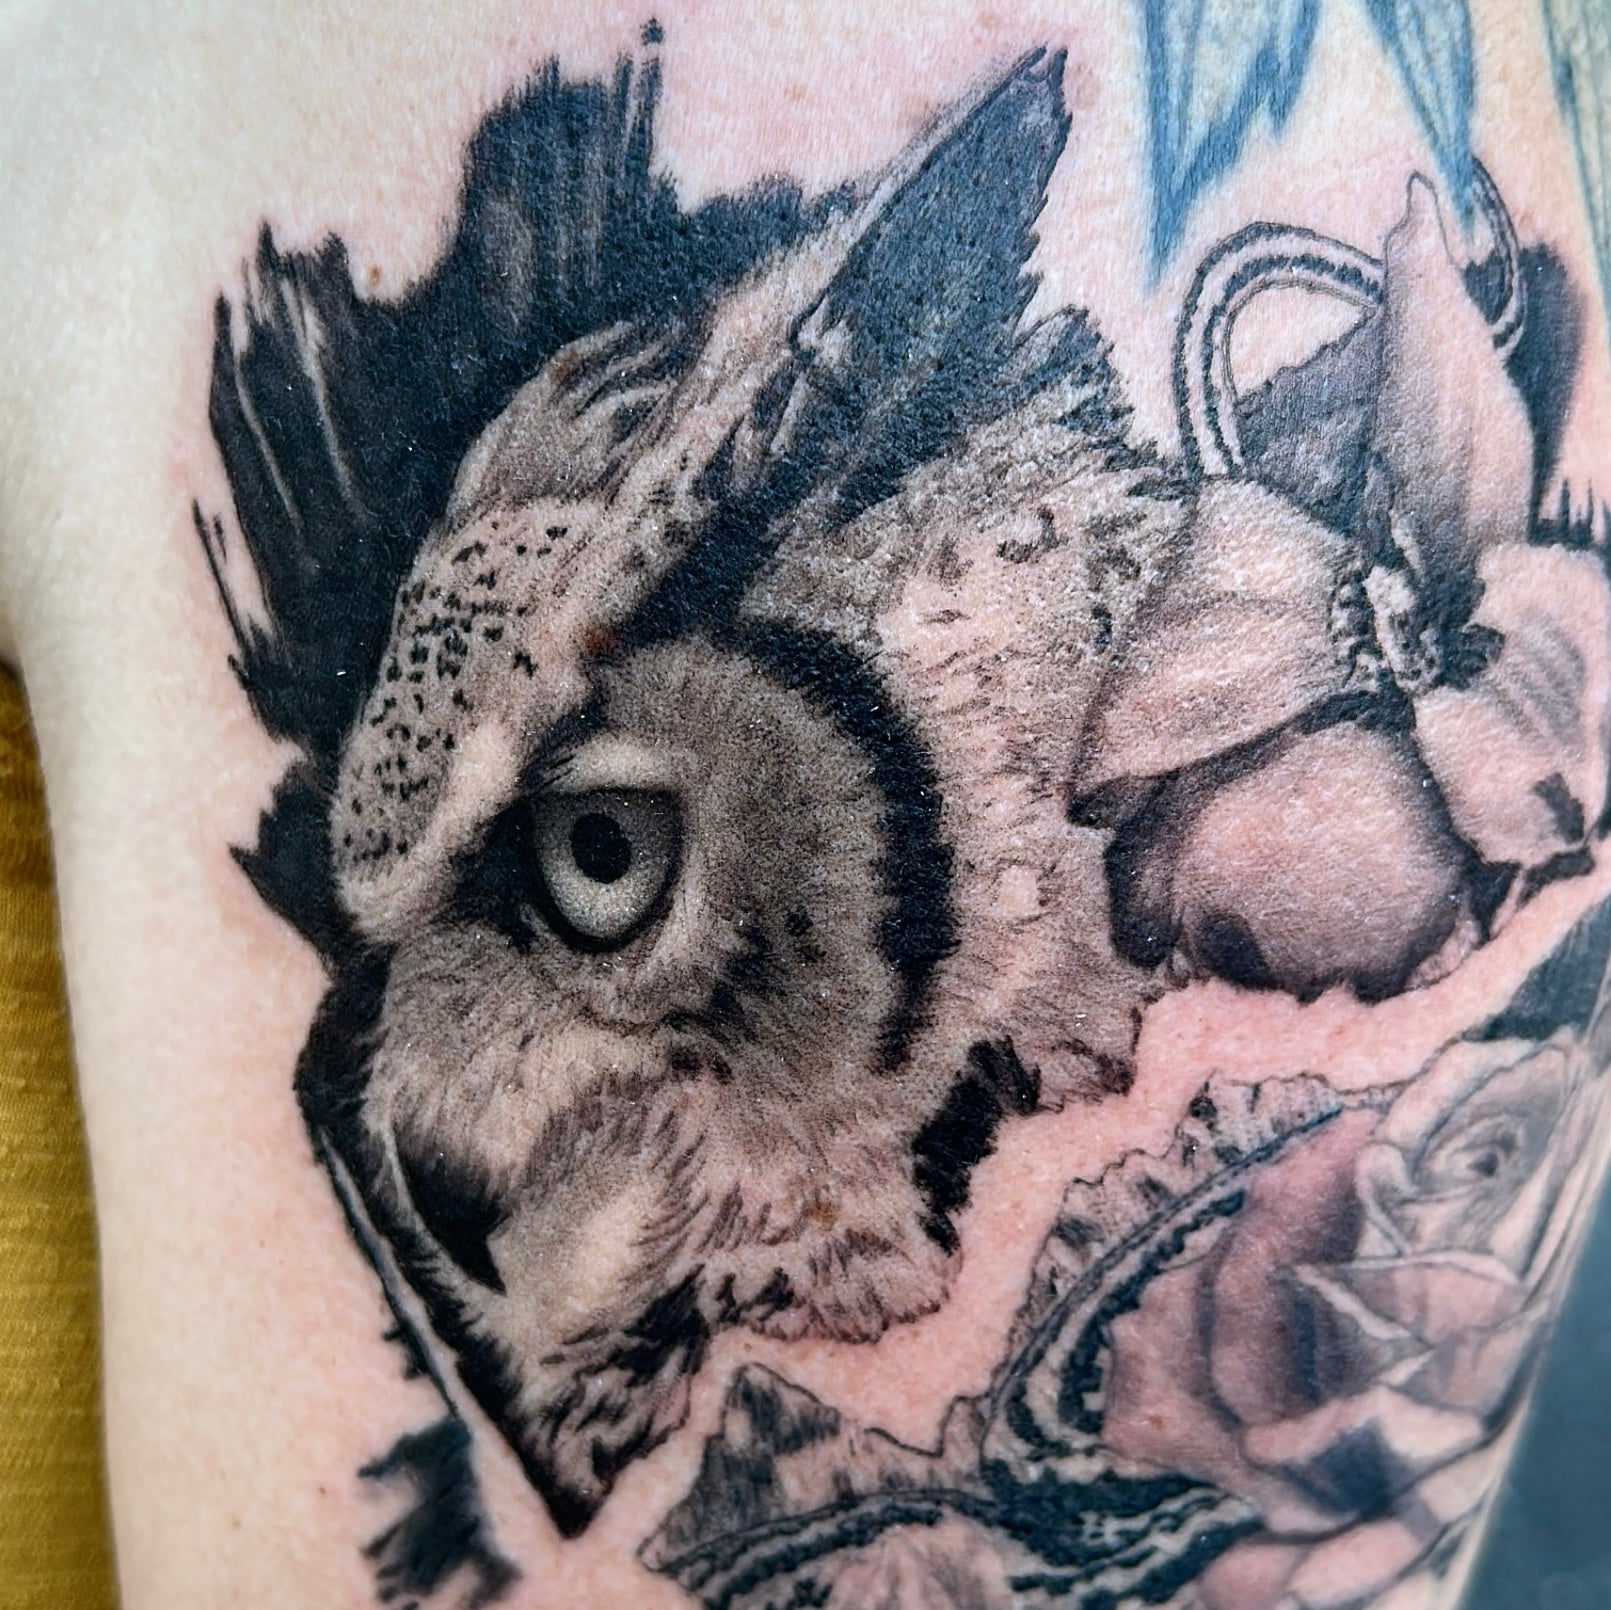 Realistic Owl Portrait with  Snake and Flowers by Danny Schreiber